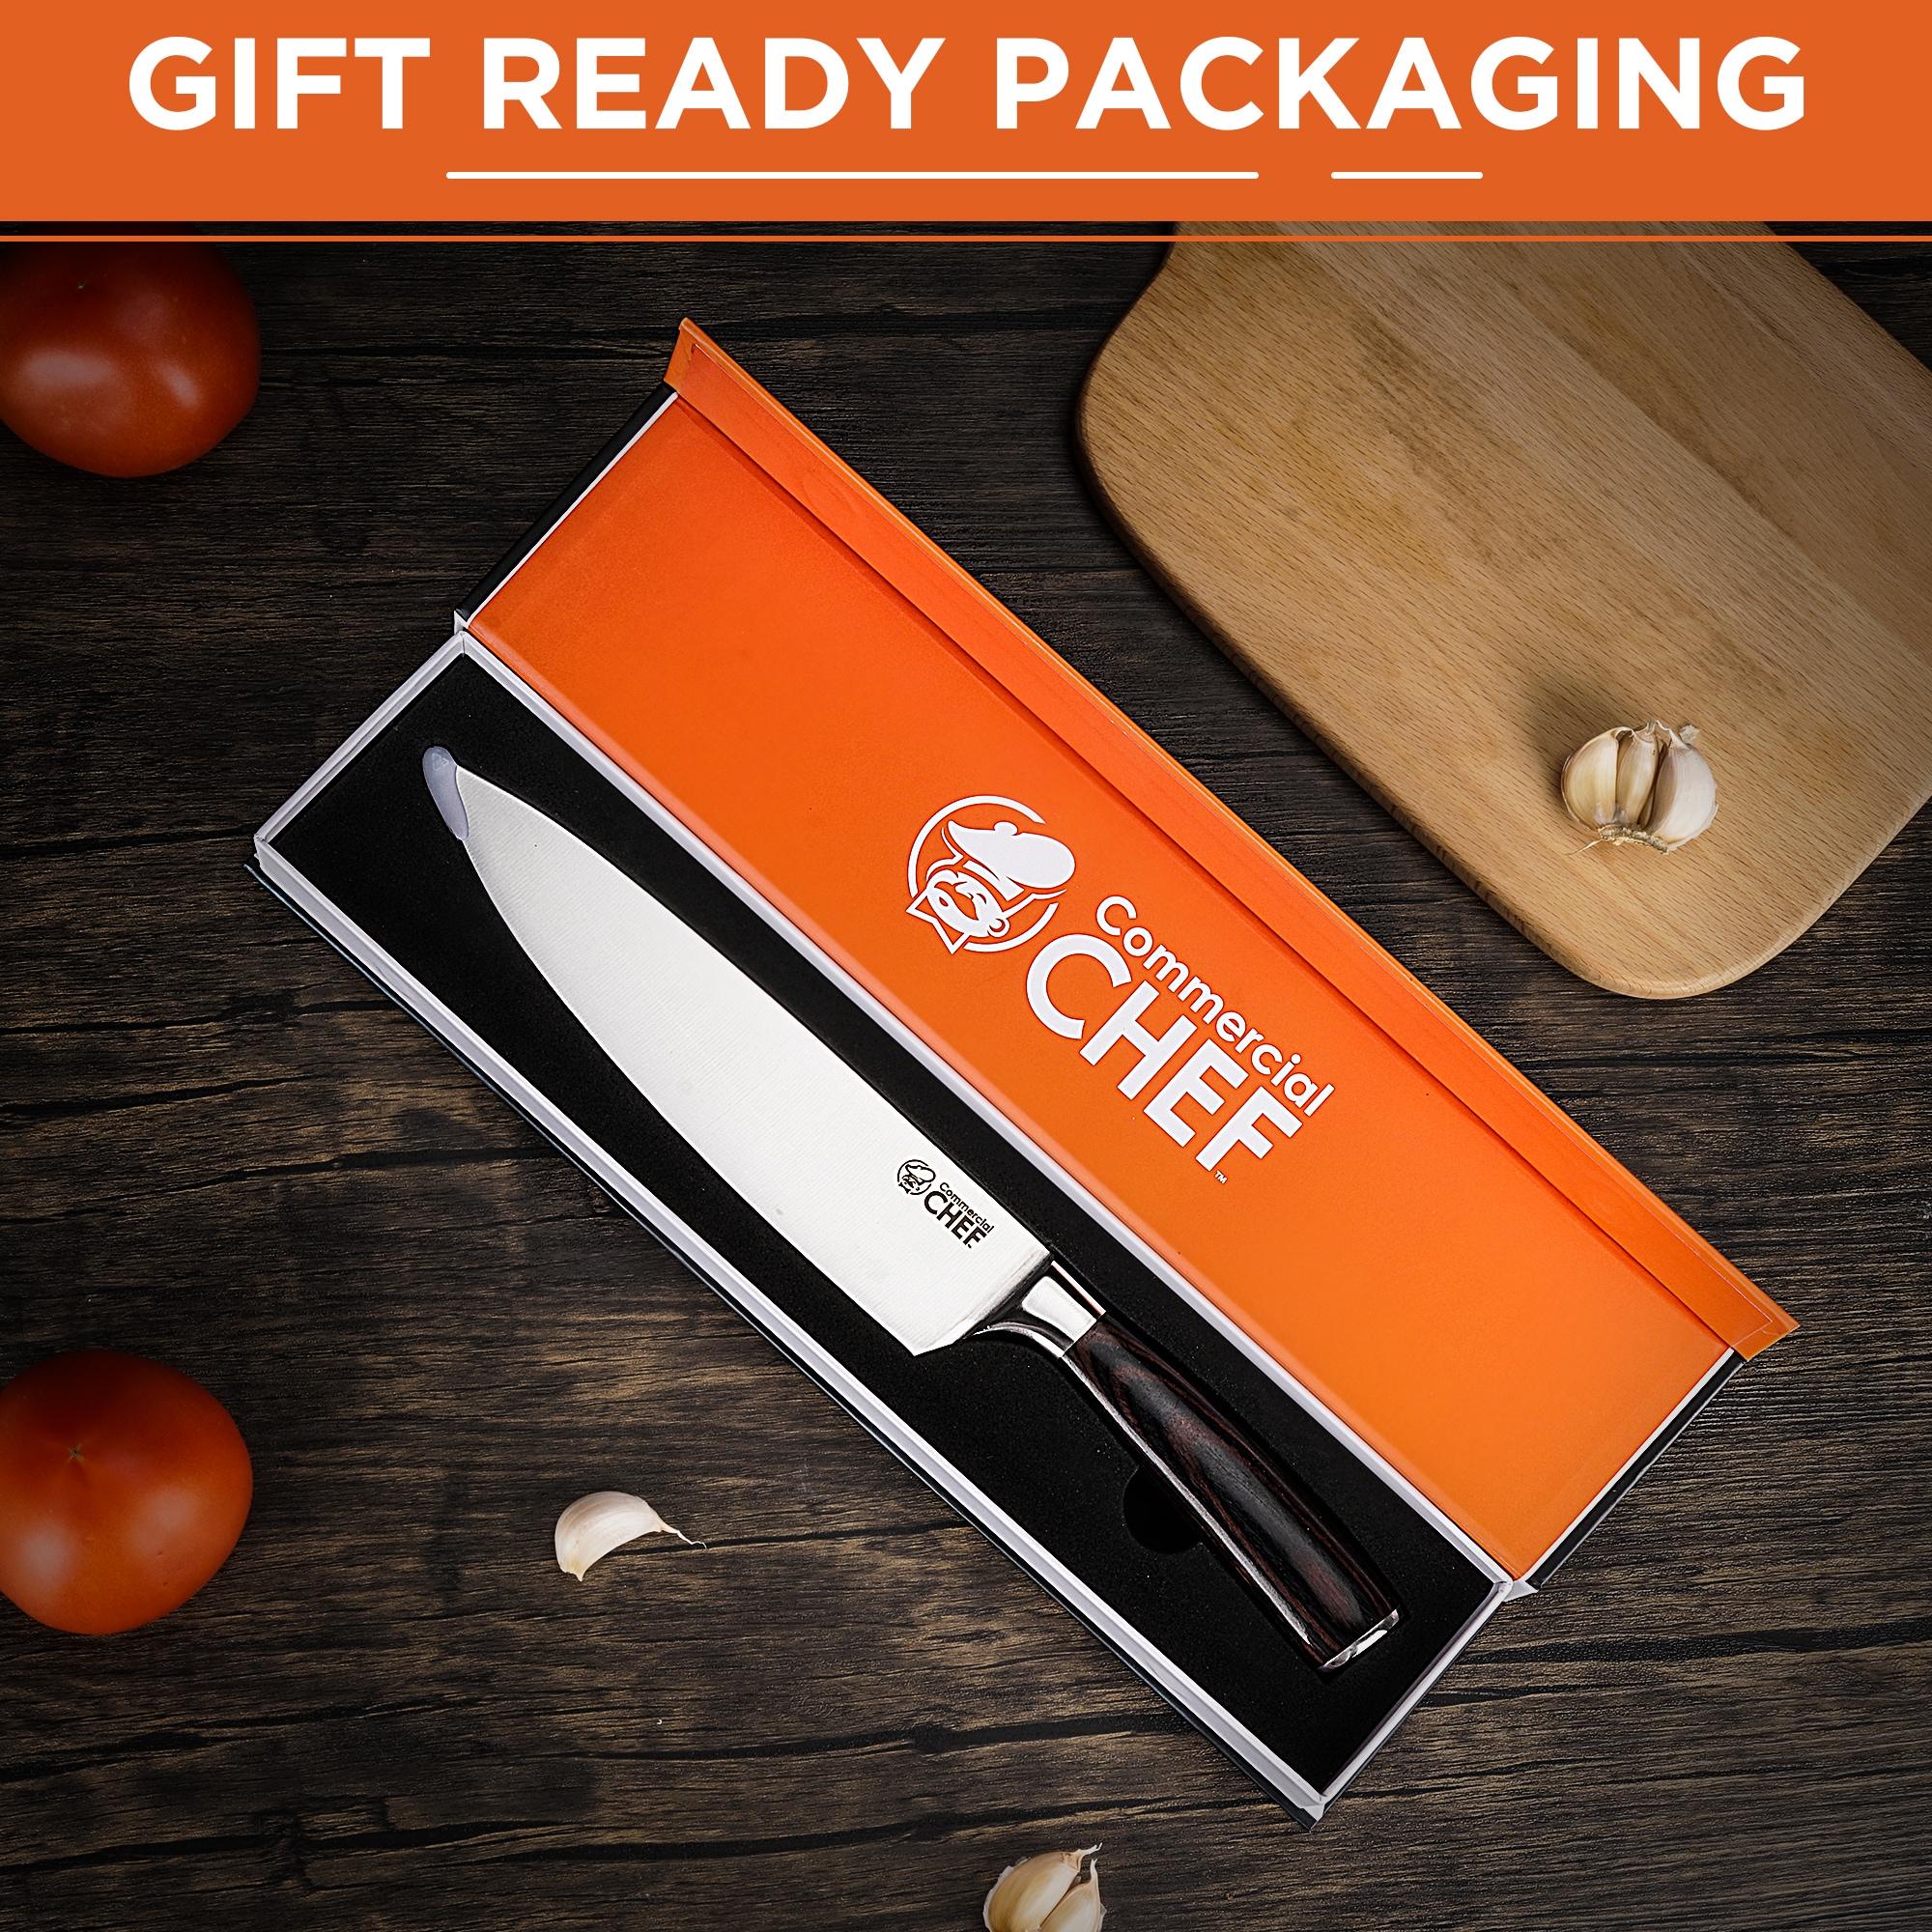 Commercial Chef Japanese Chef Knife 8 inch High Carbon German Stainless Steel with Ergonomic Pakkawood Handle - Tang Ultra Sharp Blade Edge - High Carbon Stainless Steel Chef's Knives - Pakka